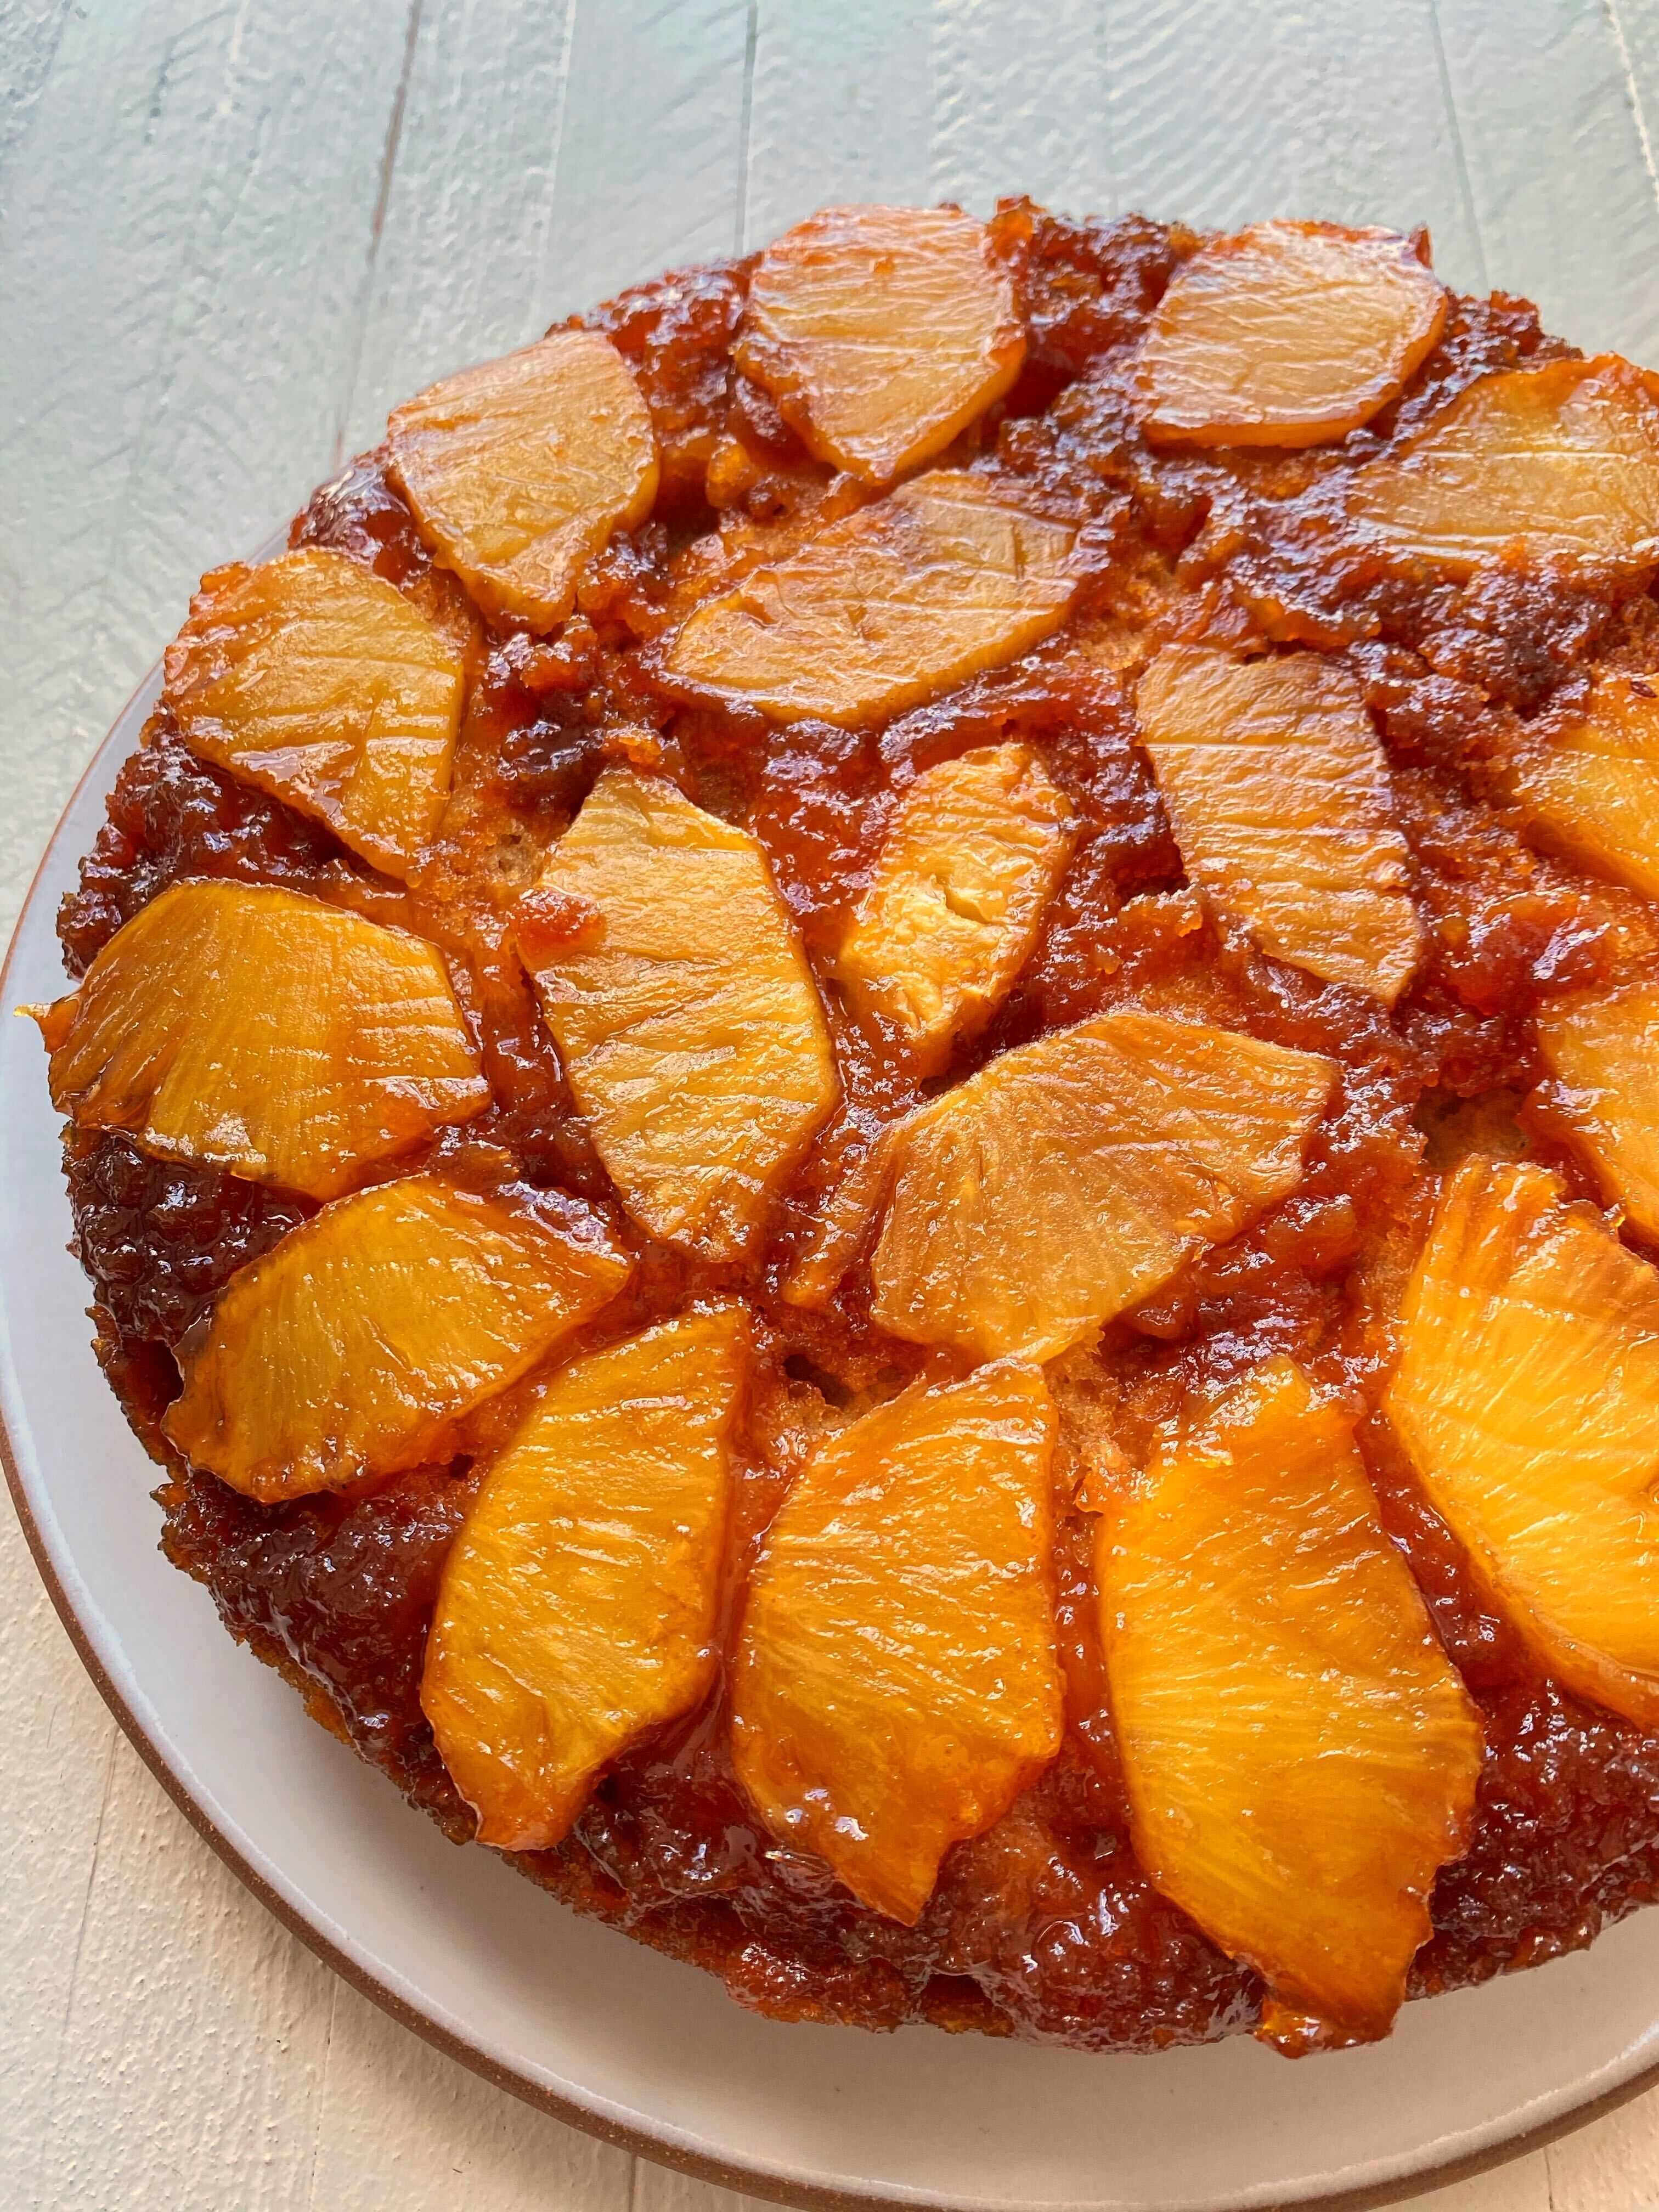 Pineapple Upside Down Cake by bravotopchef | Quick &amp; Easy Recipe | The Feedfeed